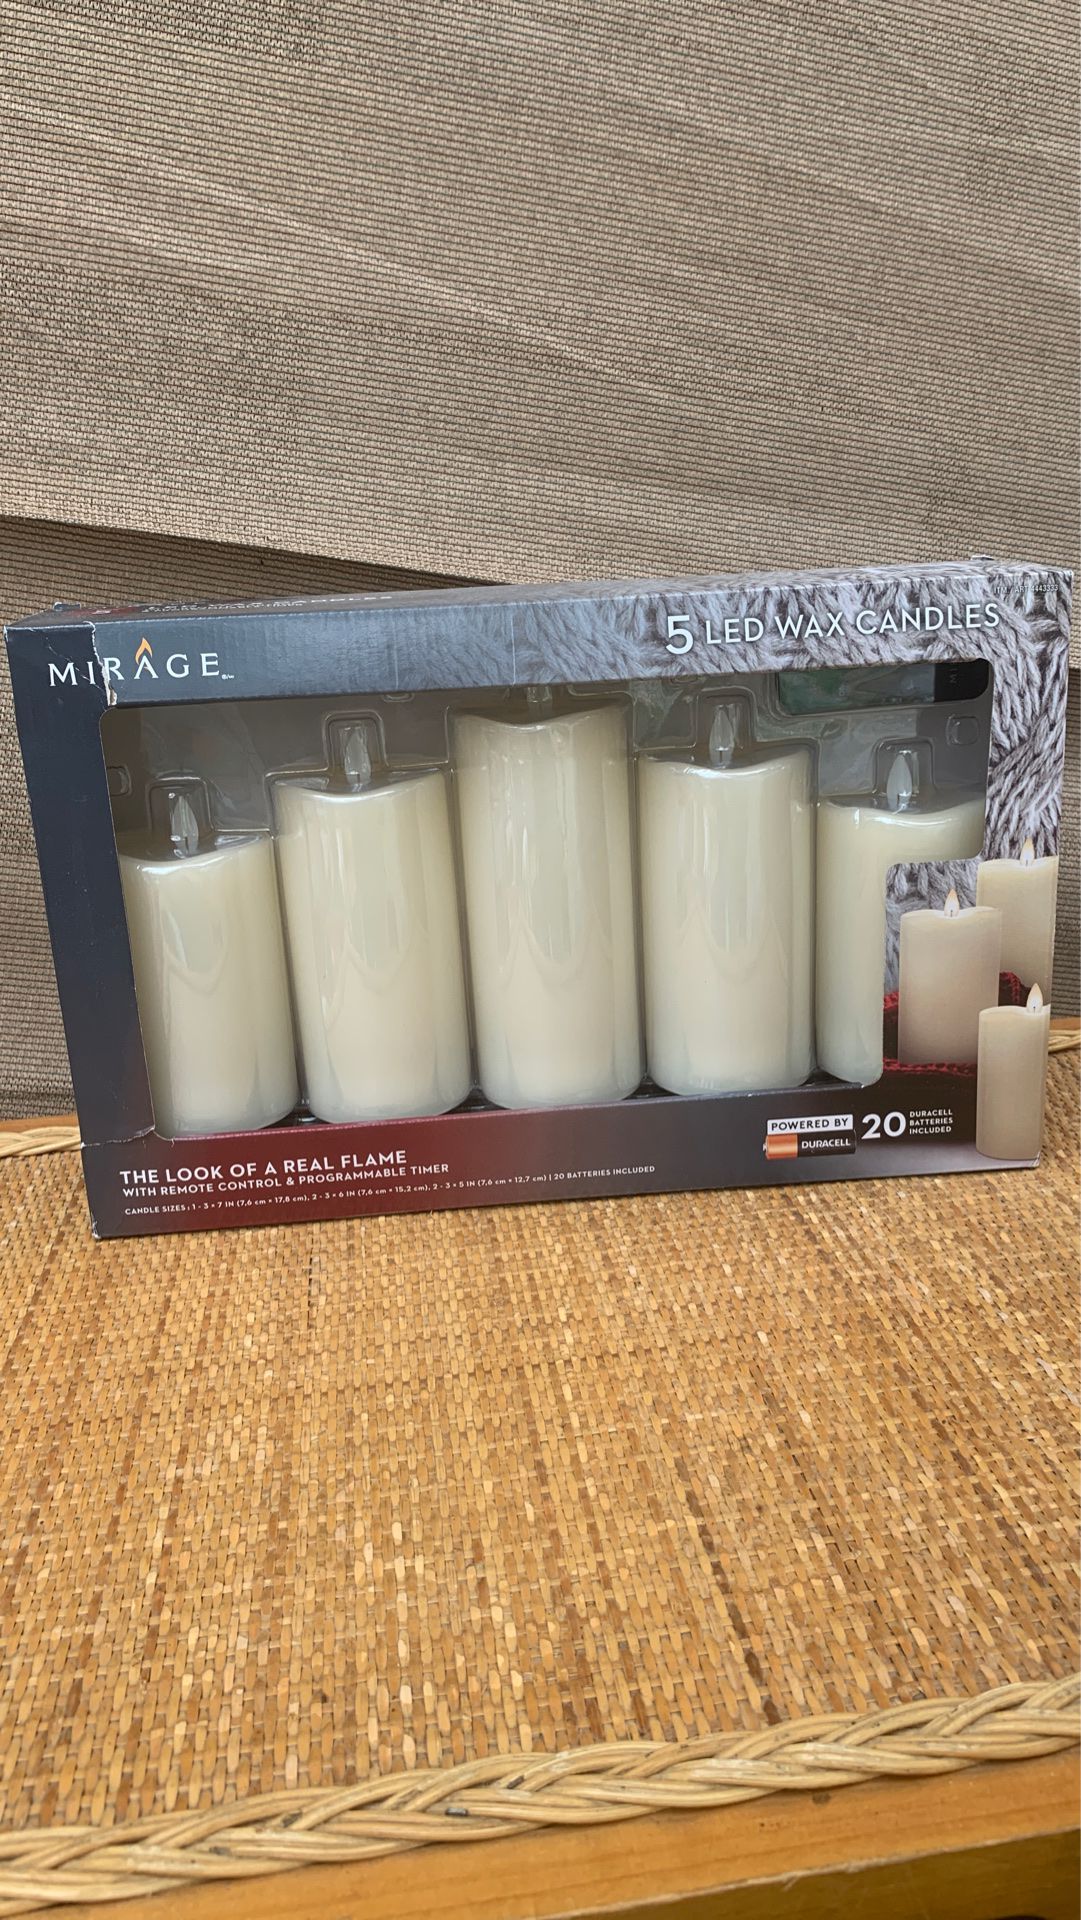 LED wax candles with remote control 5 pack. New in box